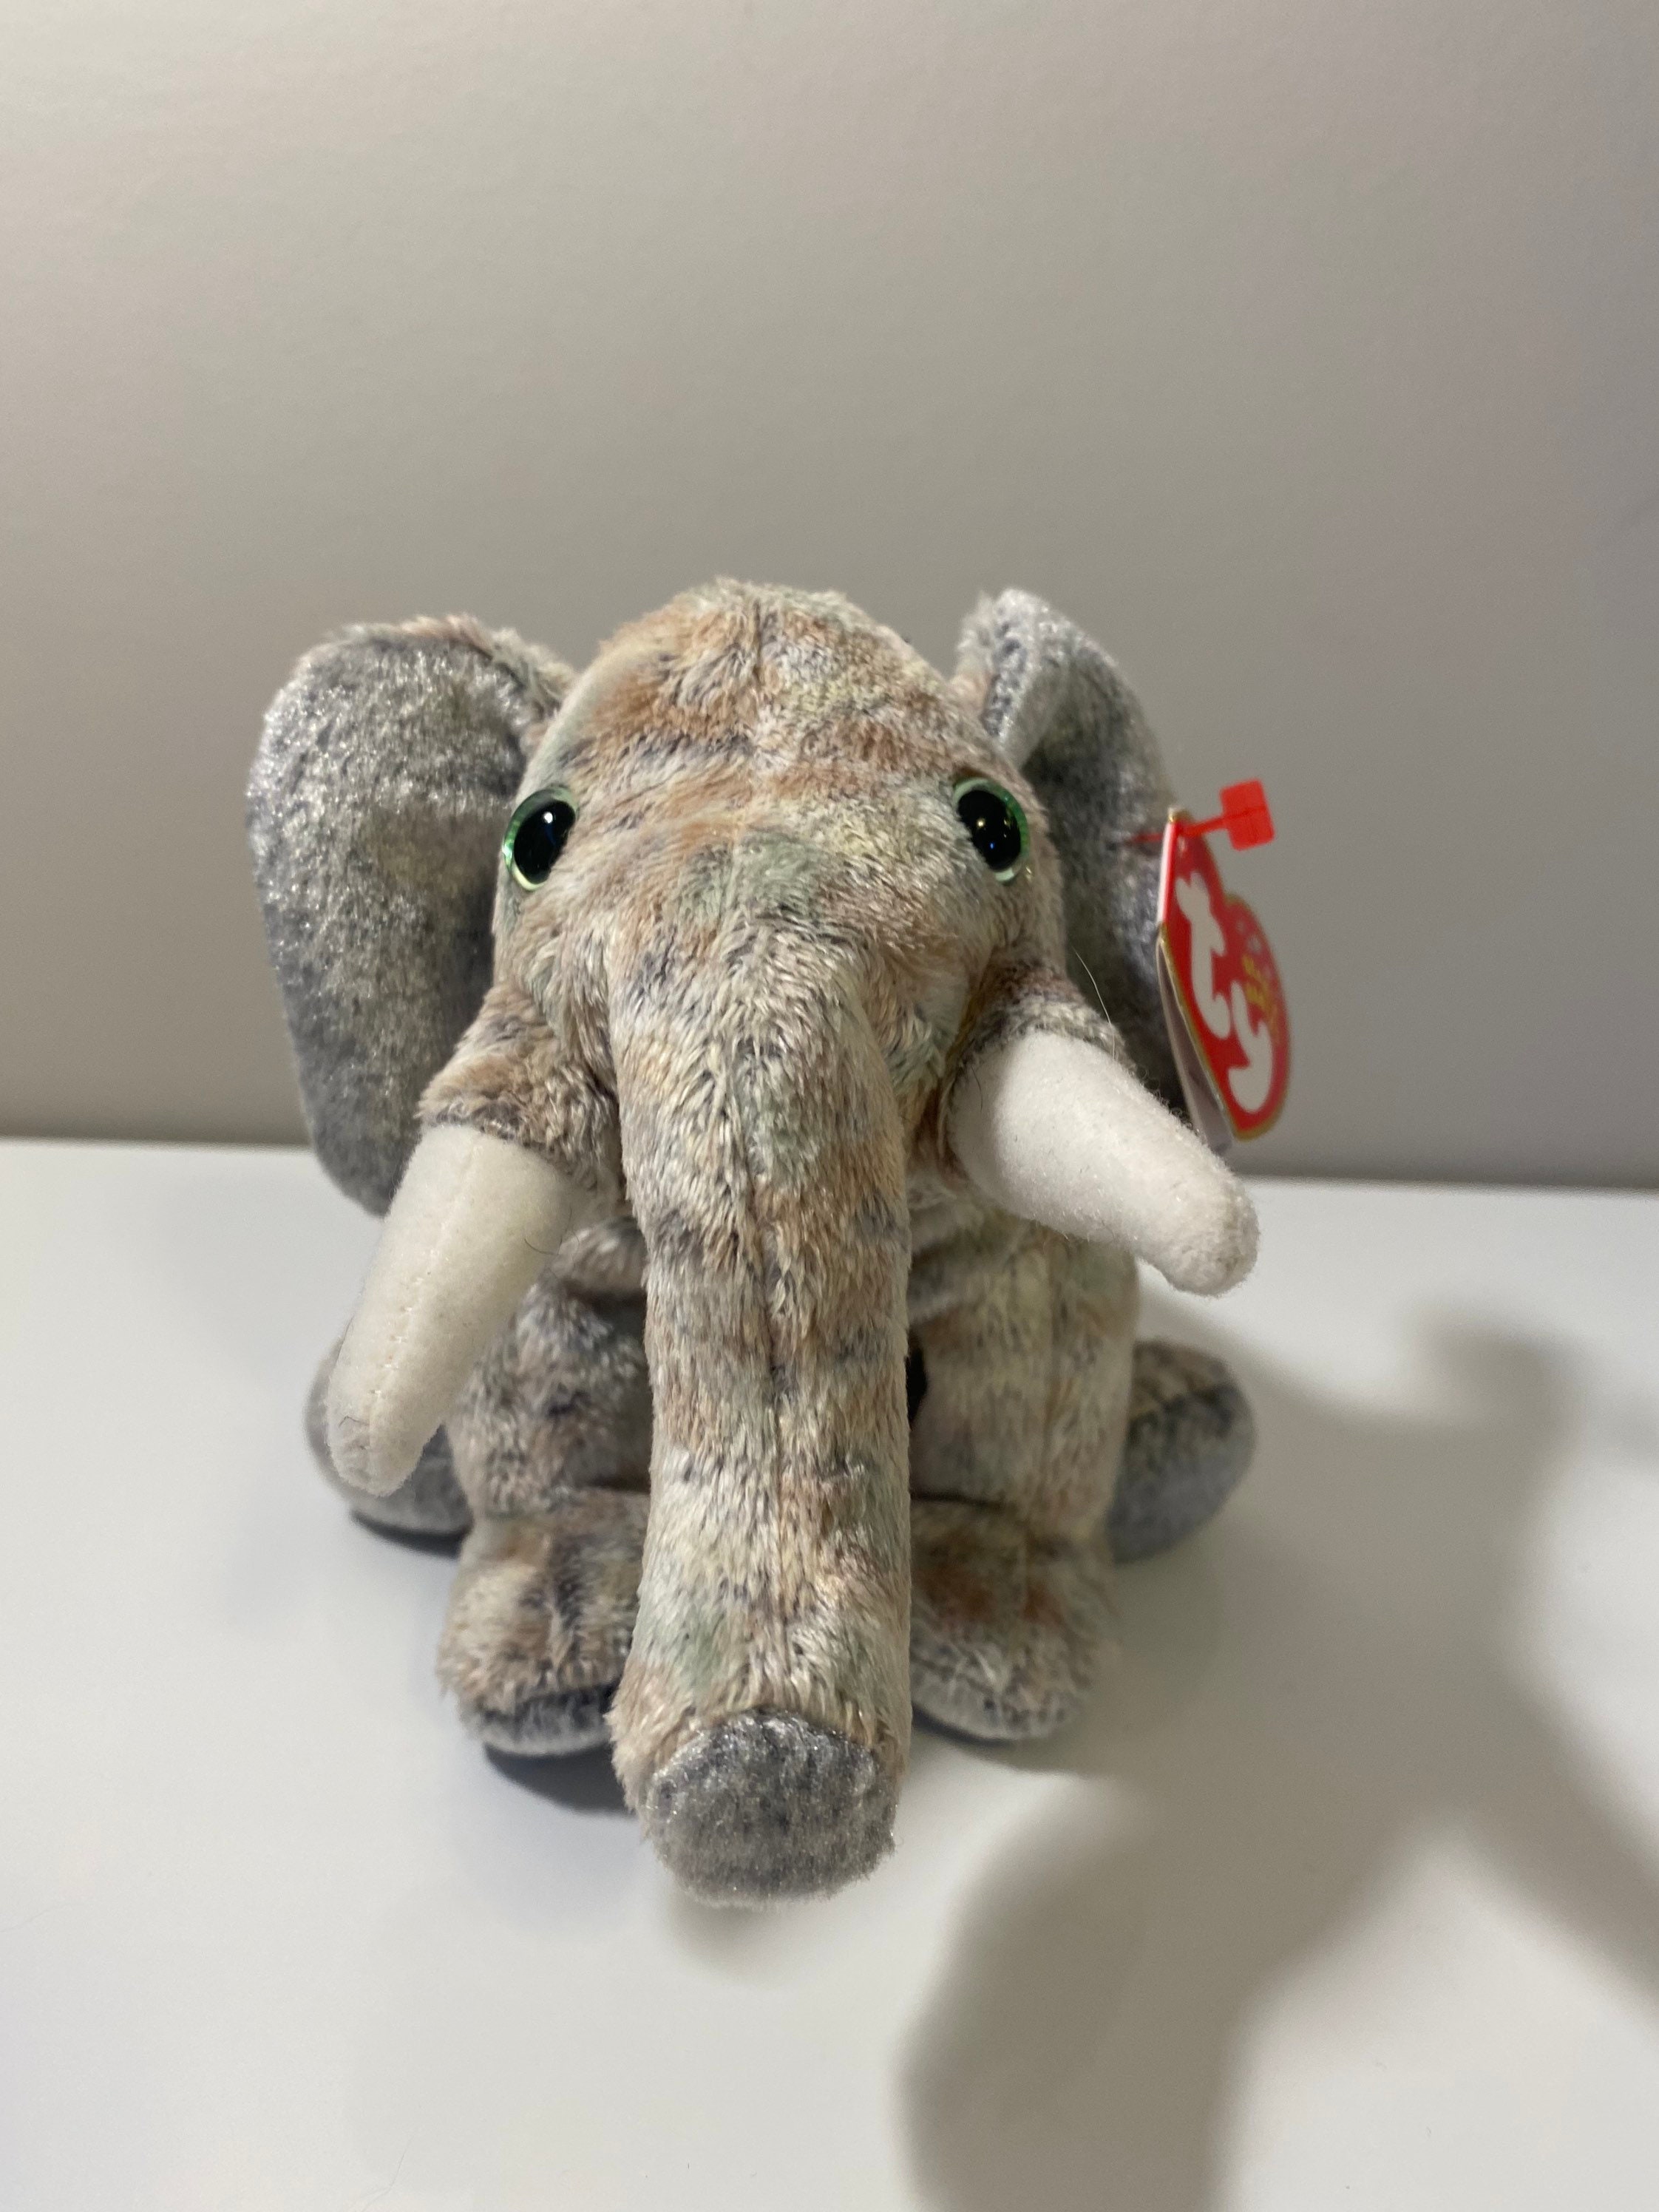 Th Persoon belast met sportgame steeg TY Beanie Baby Pounds de olifant 7 inch - Etsy België